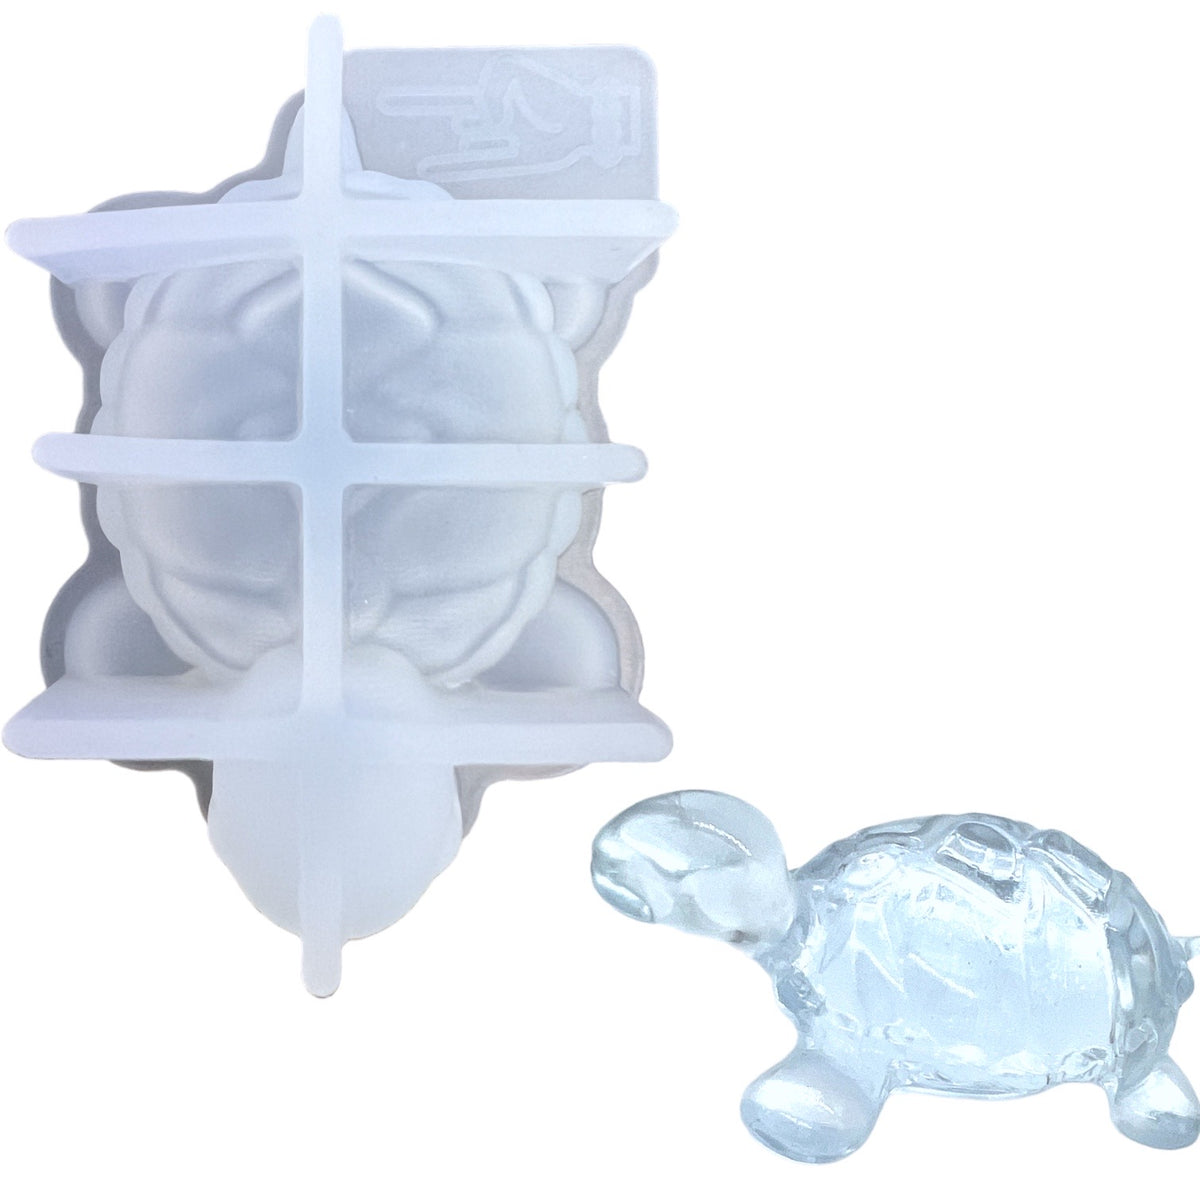 Resin Rockers Exclusive 3D Mini Turtle Mold for UV and Epoxy Resin Art